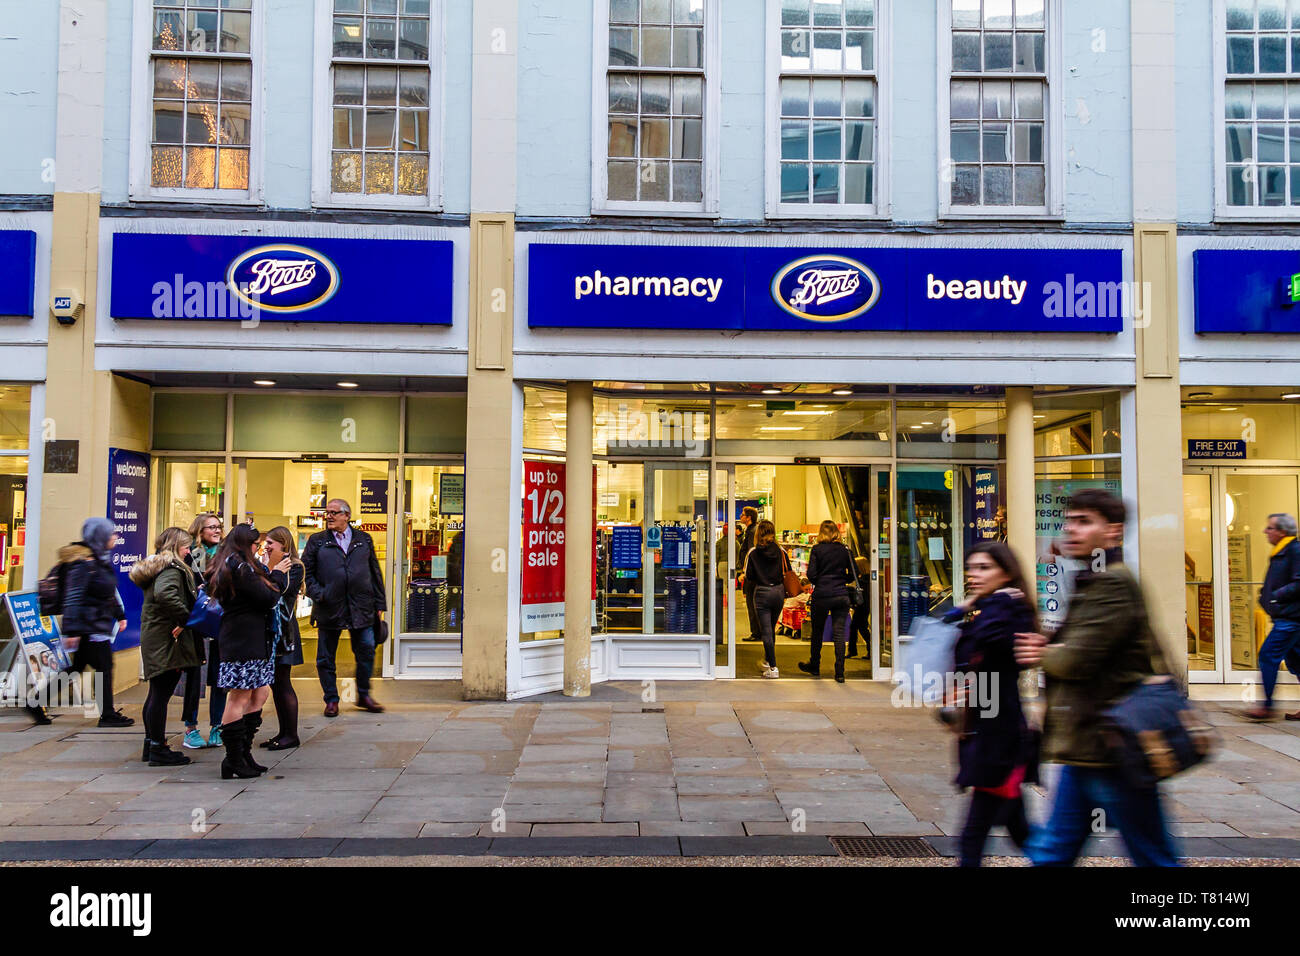 People walking past the front of Boots pharmacy or chemist in Oxford, UK. December 2018. Stock Photo